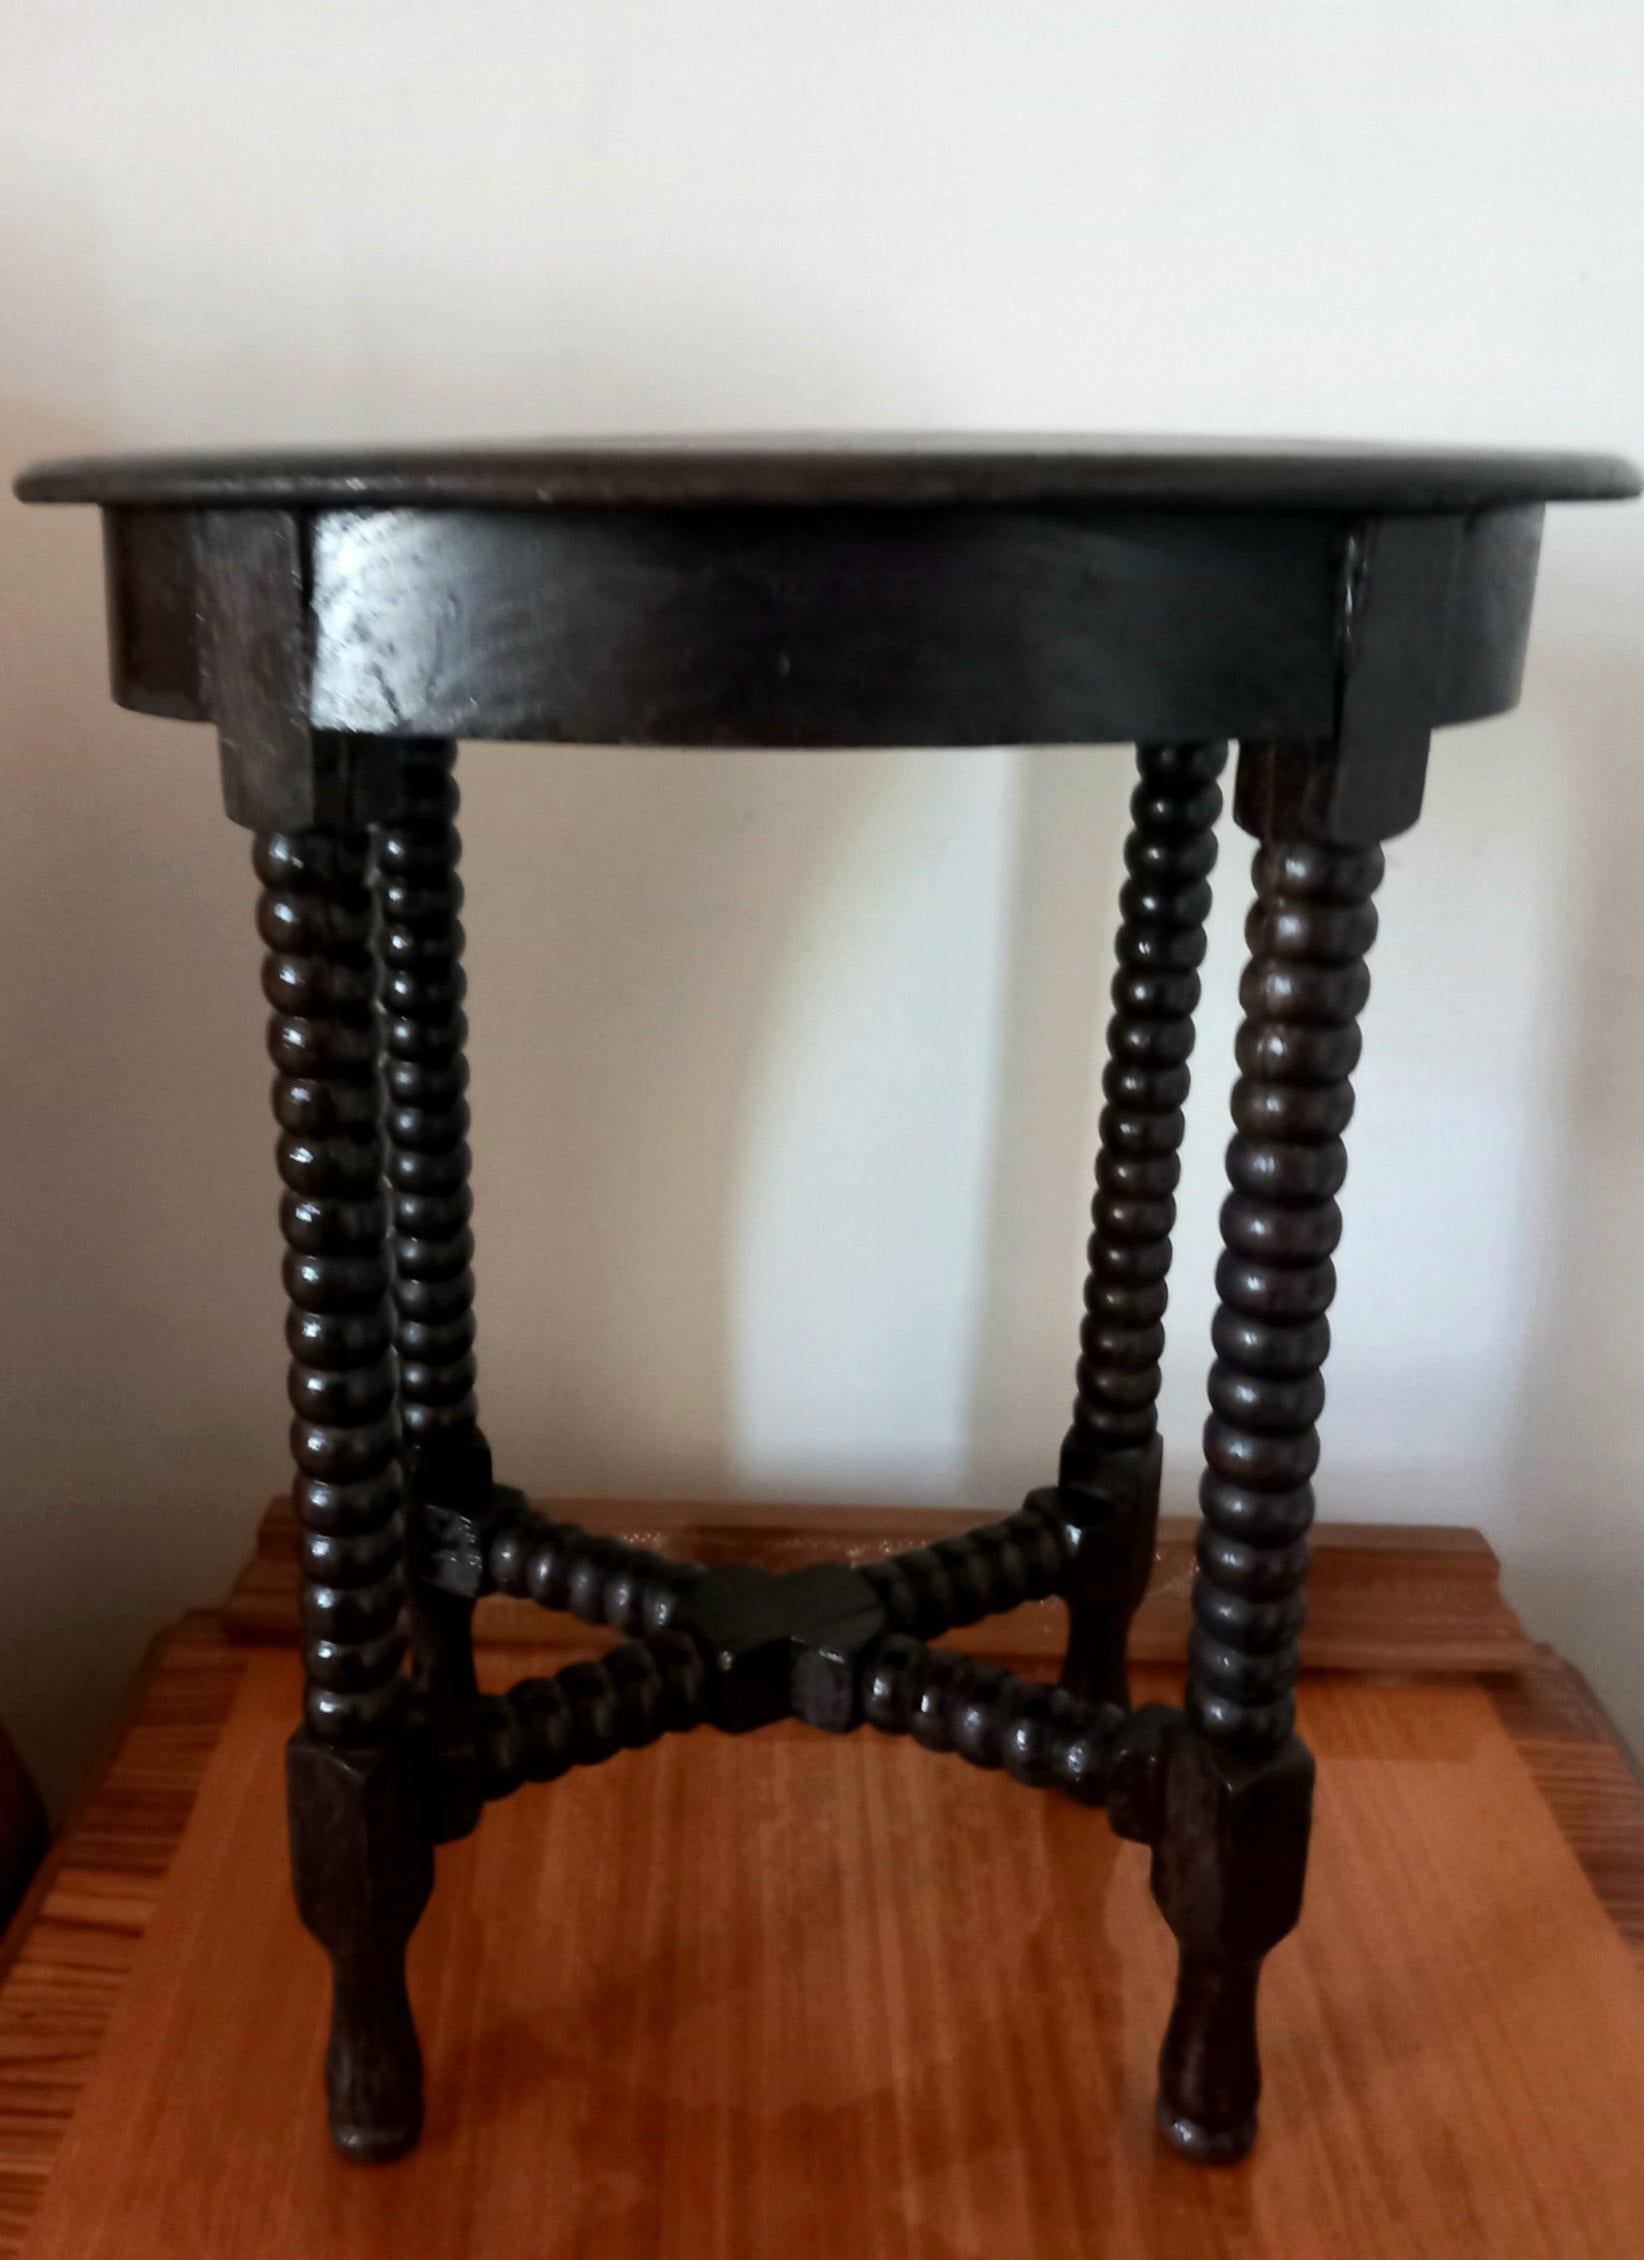 Aesthetic Movement Small Oval Table or Stool Bobbin Turned Legs, 19th Century Spain